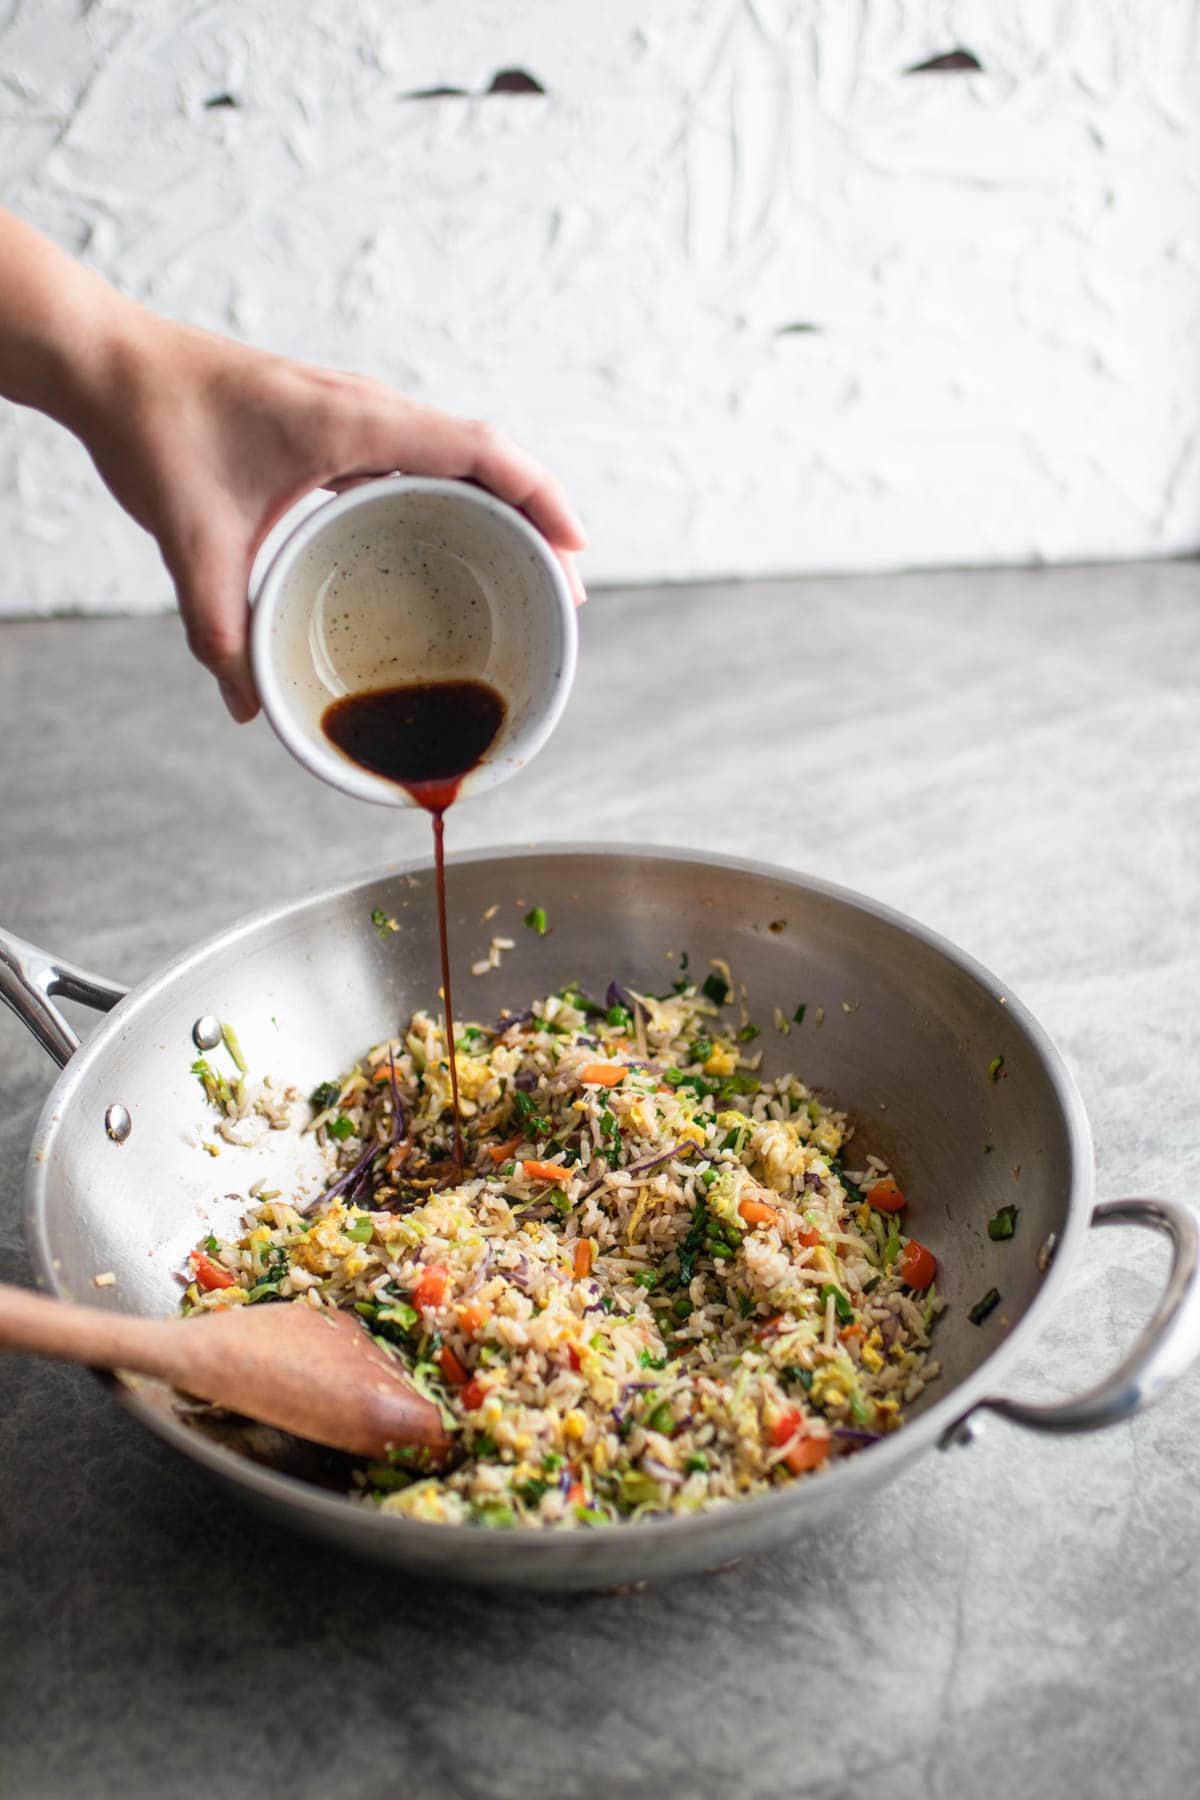 Pouring sauce into cooked fried rice.